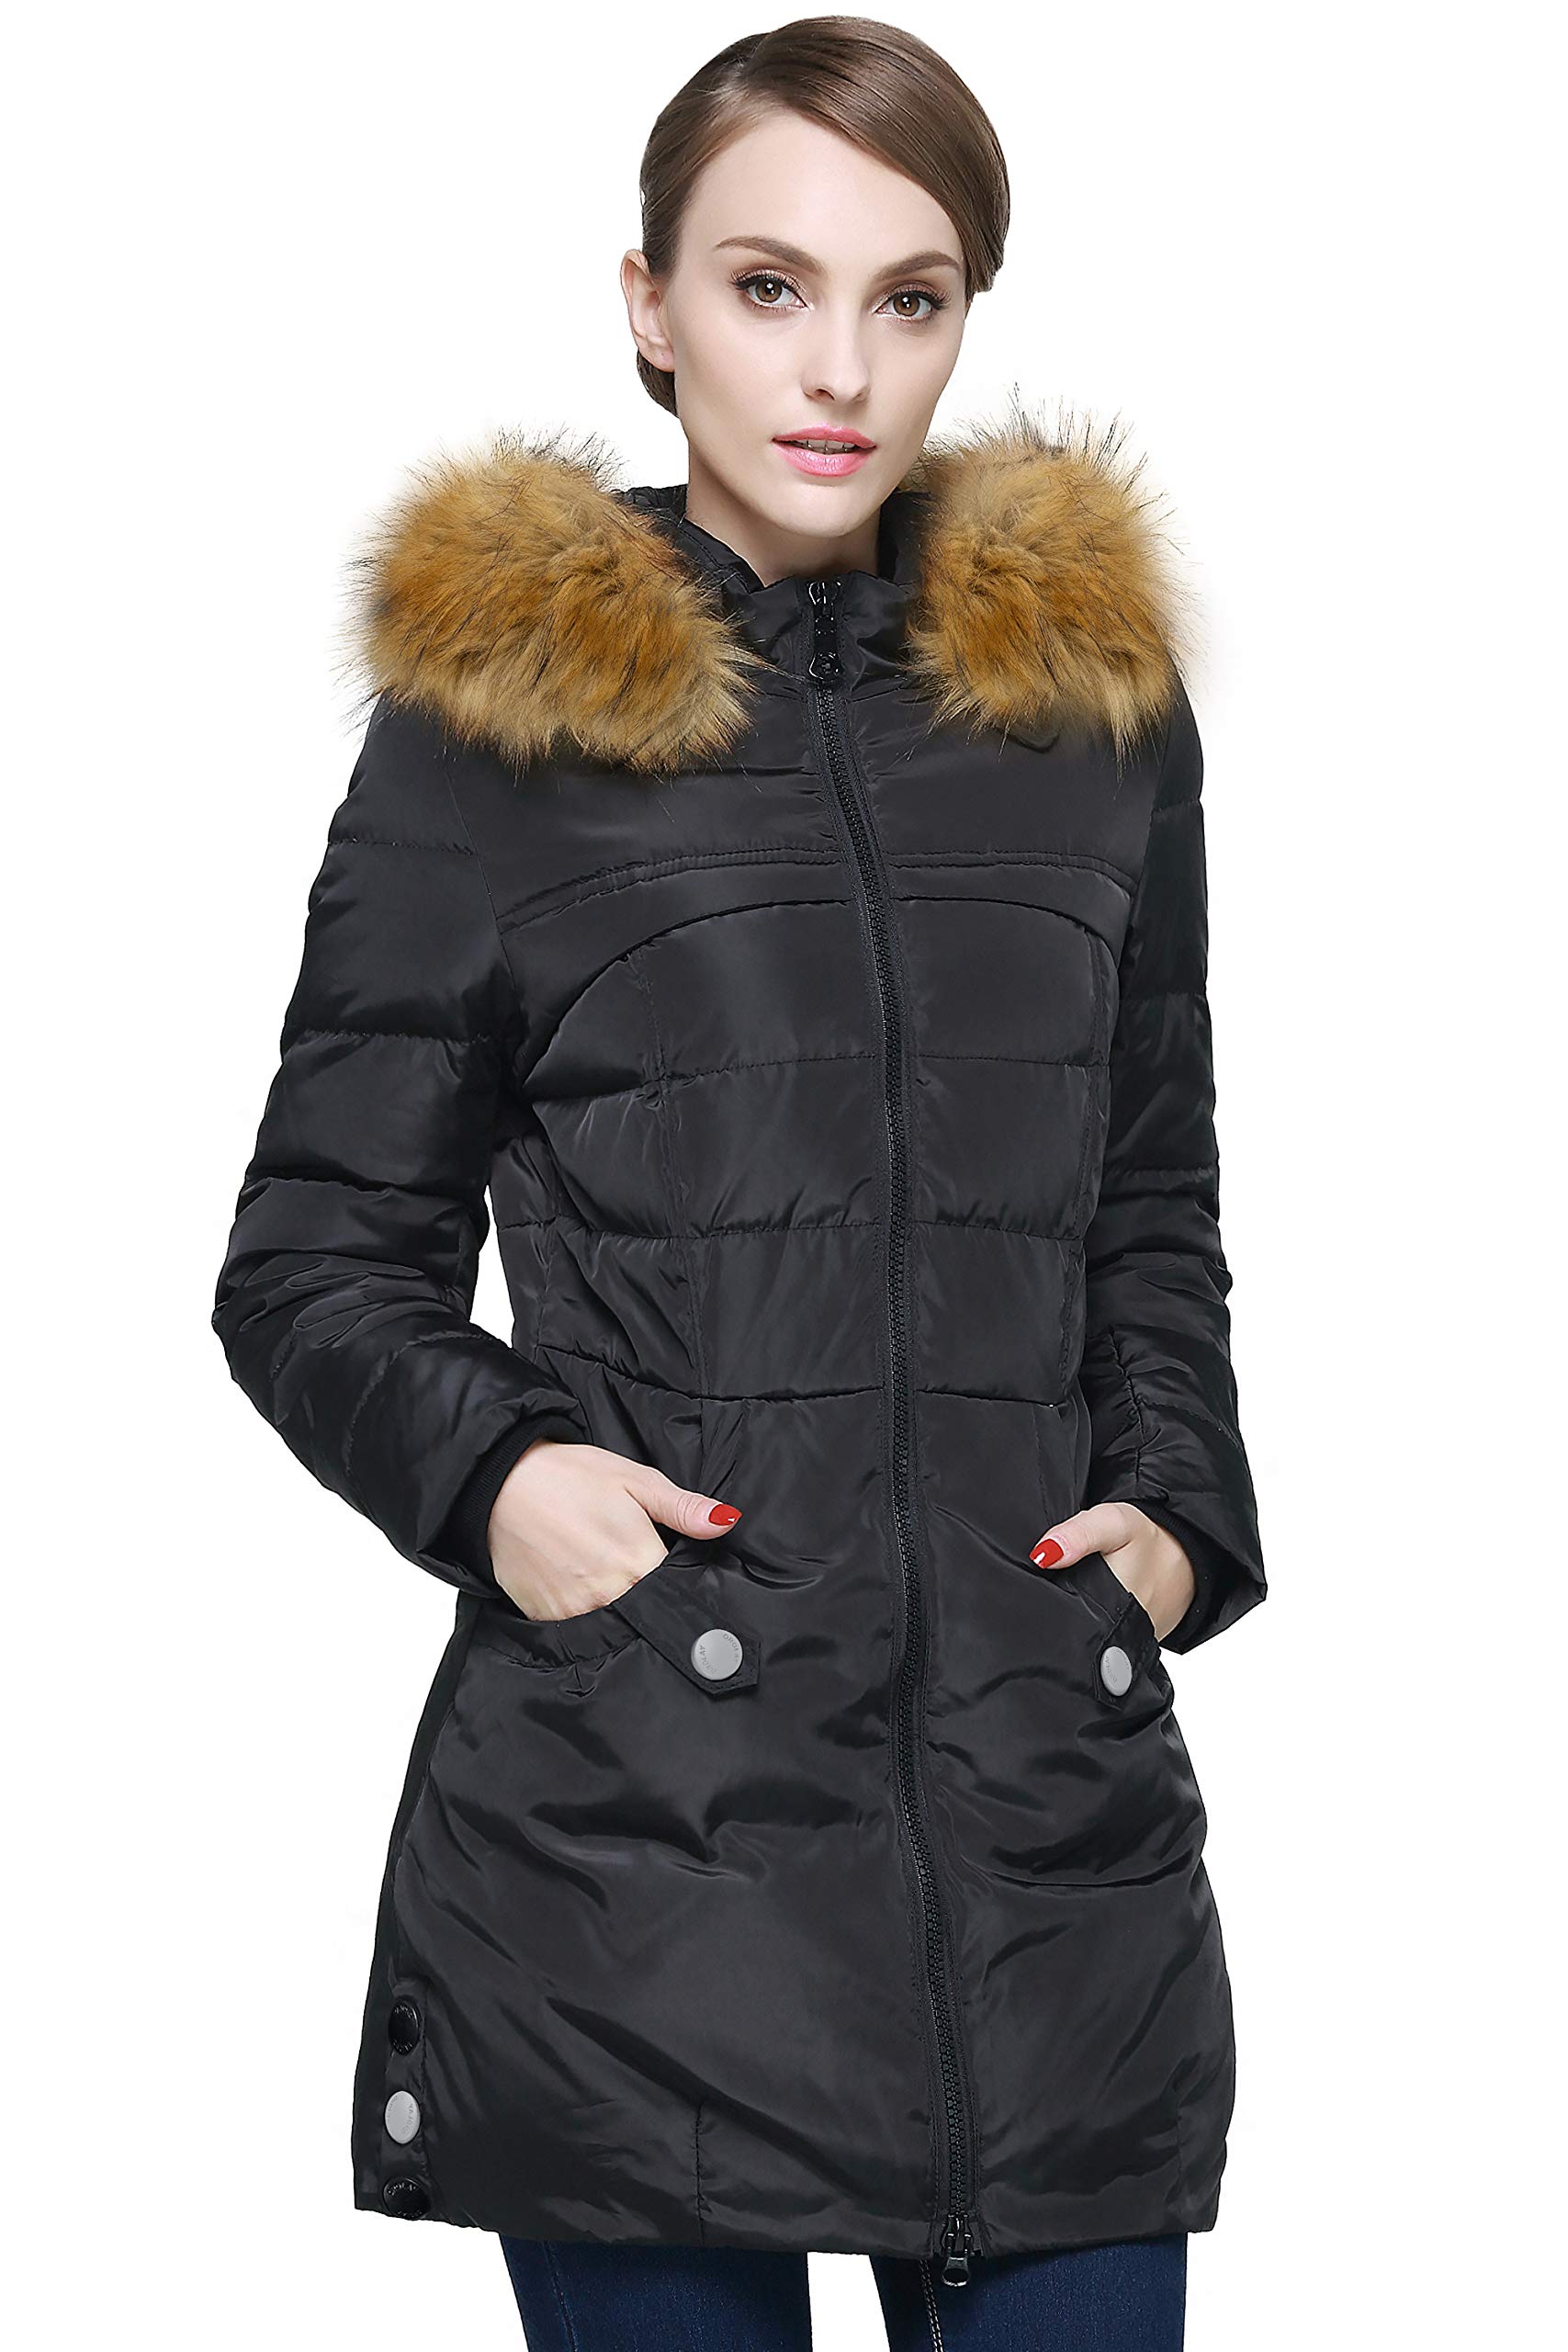 Orolay + Down Jacket with Faux Fur Trim Hood